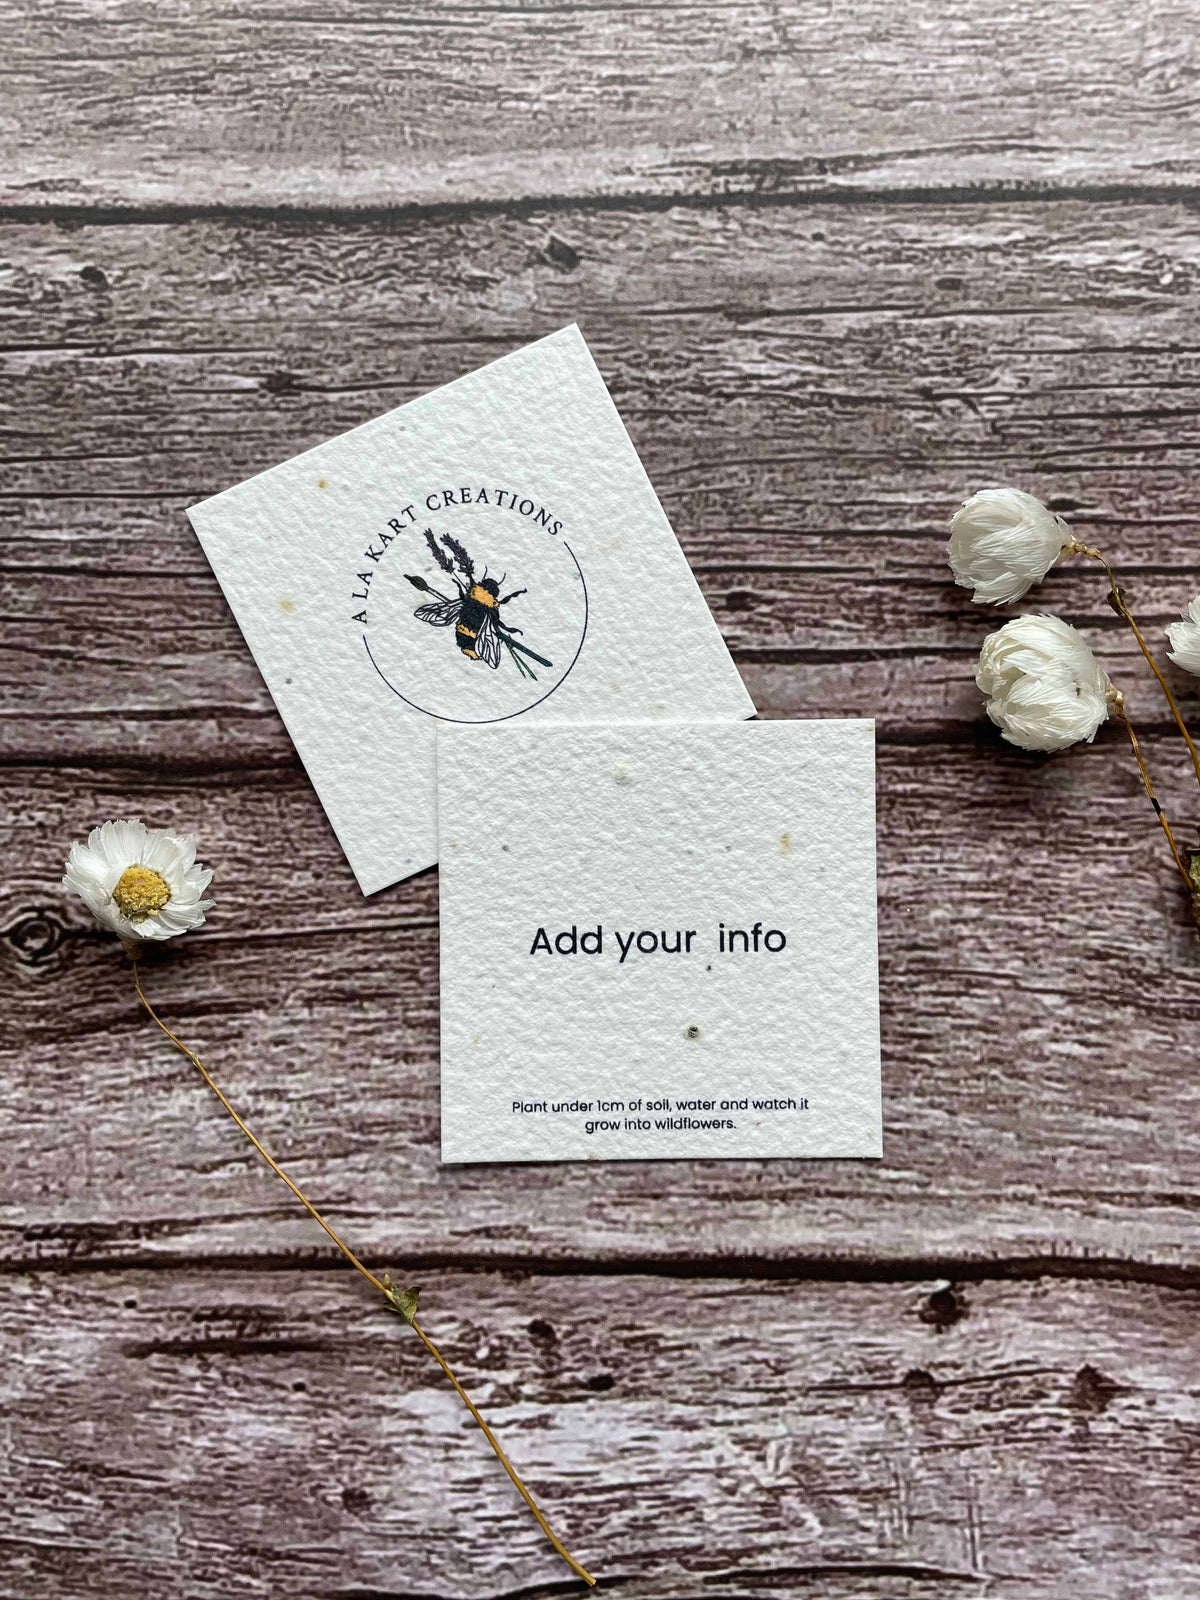 Print your own business card design on wildflower seed paper